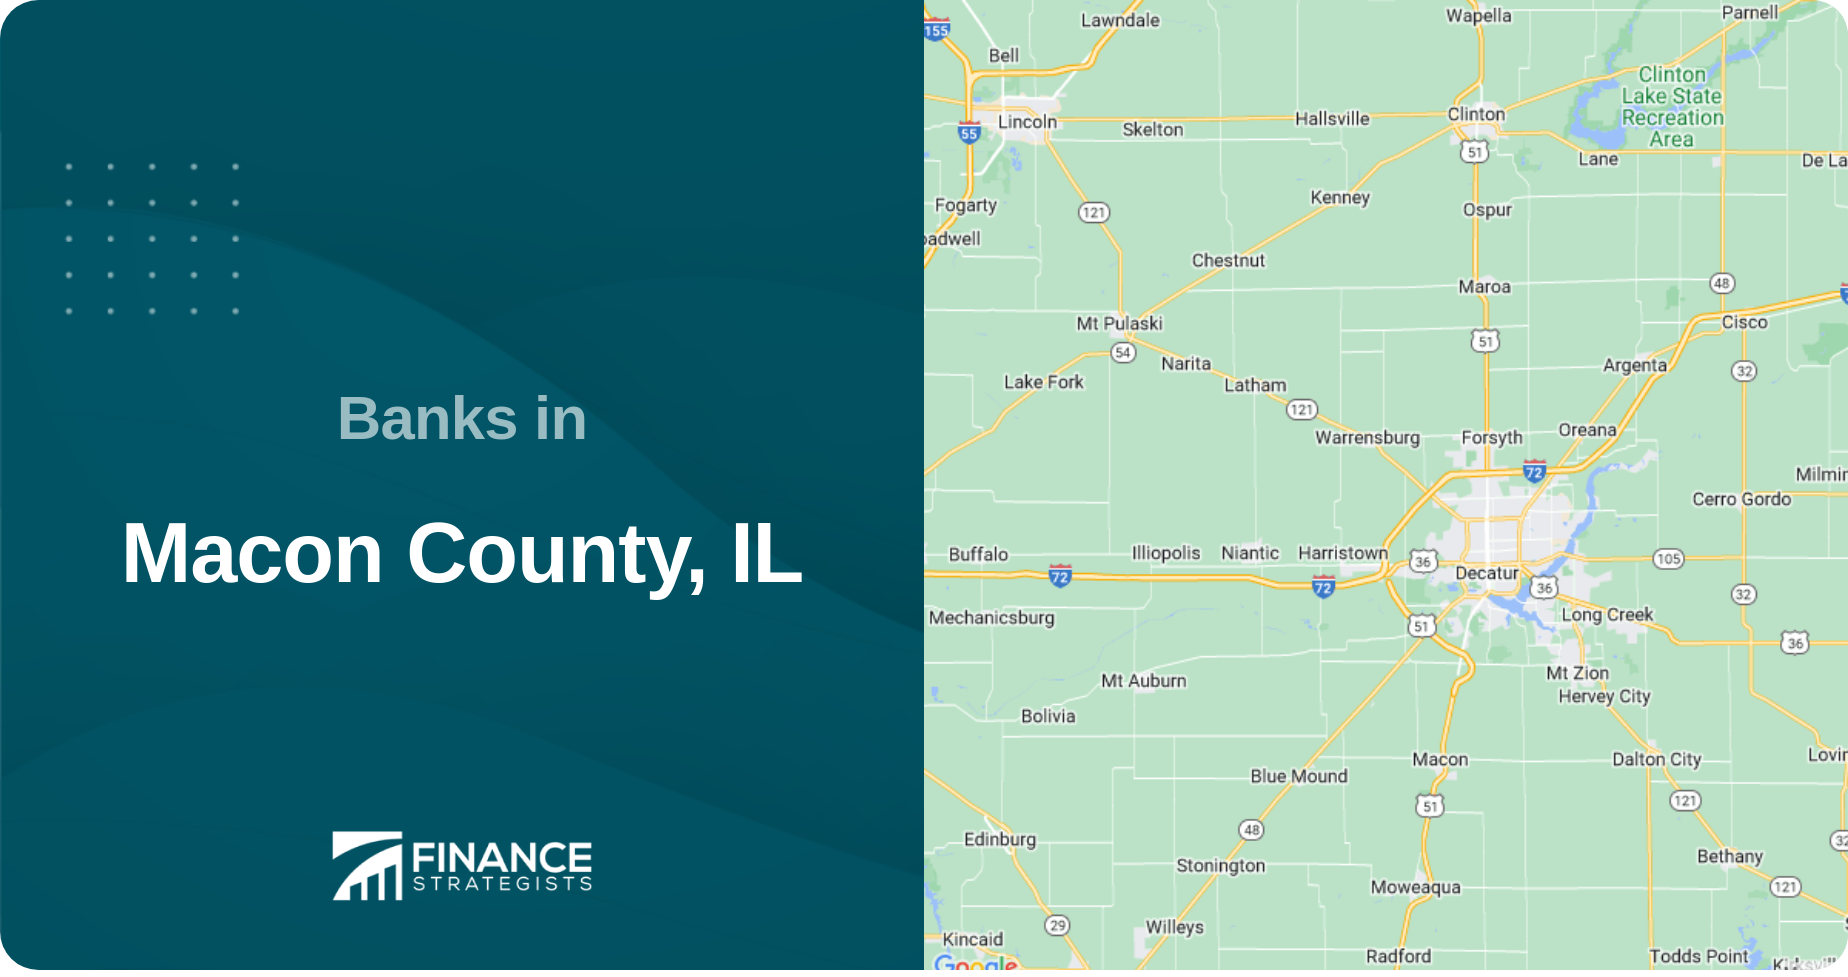 Banks in Macon County, IL